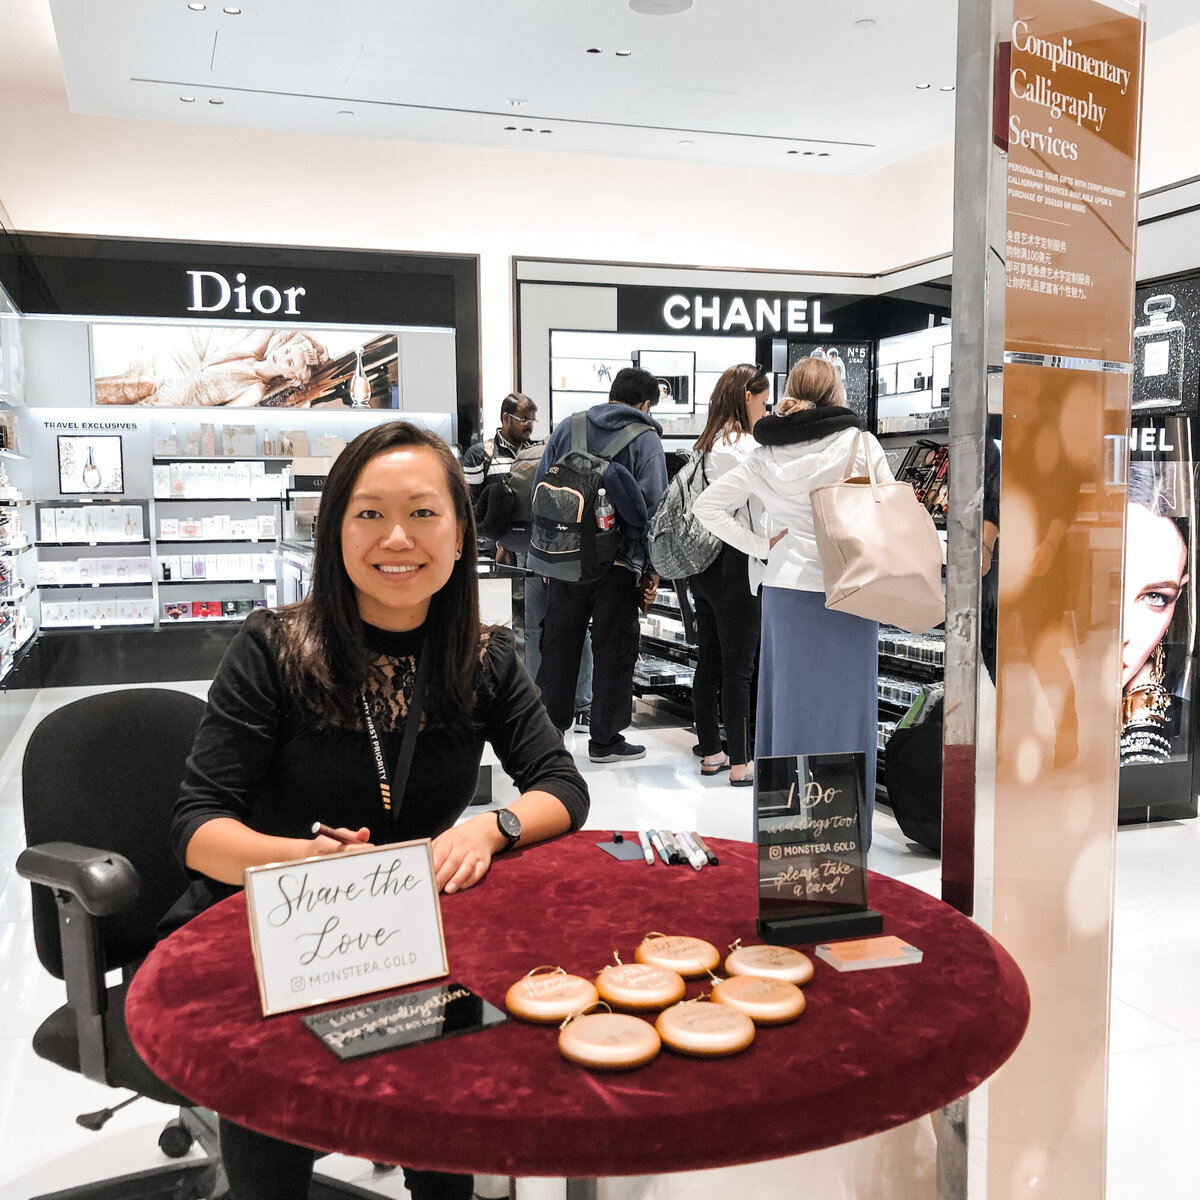 Ornament personalization at a duty free store, to increase guest engagement